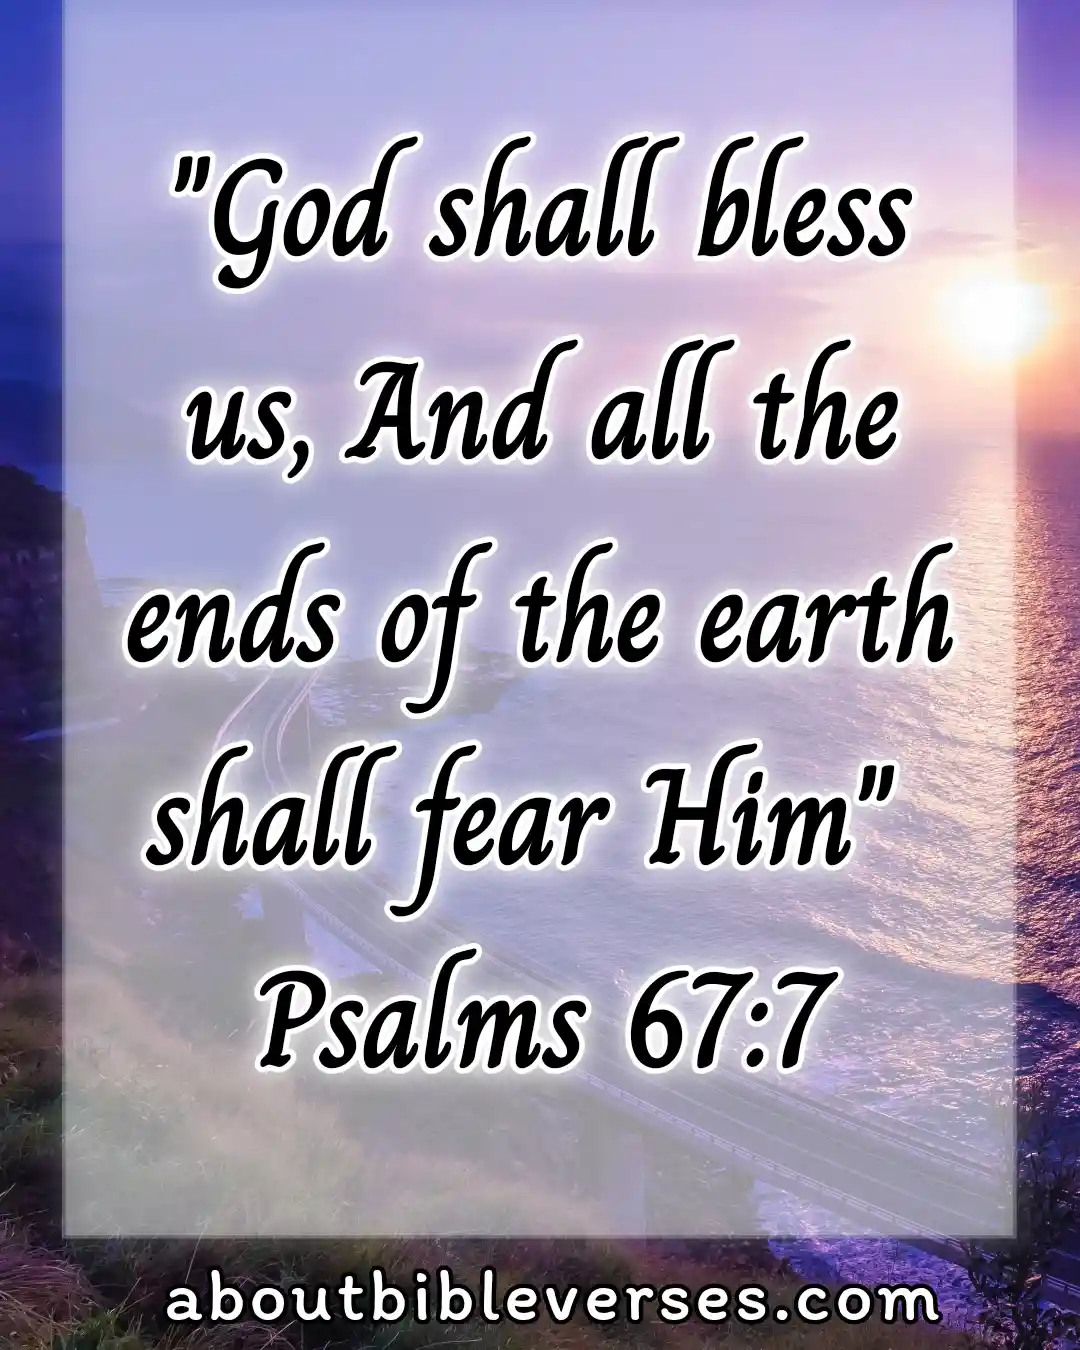 Happy Friday Blessings With Bible Verses (Psalm 67:7)